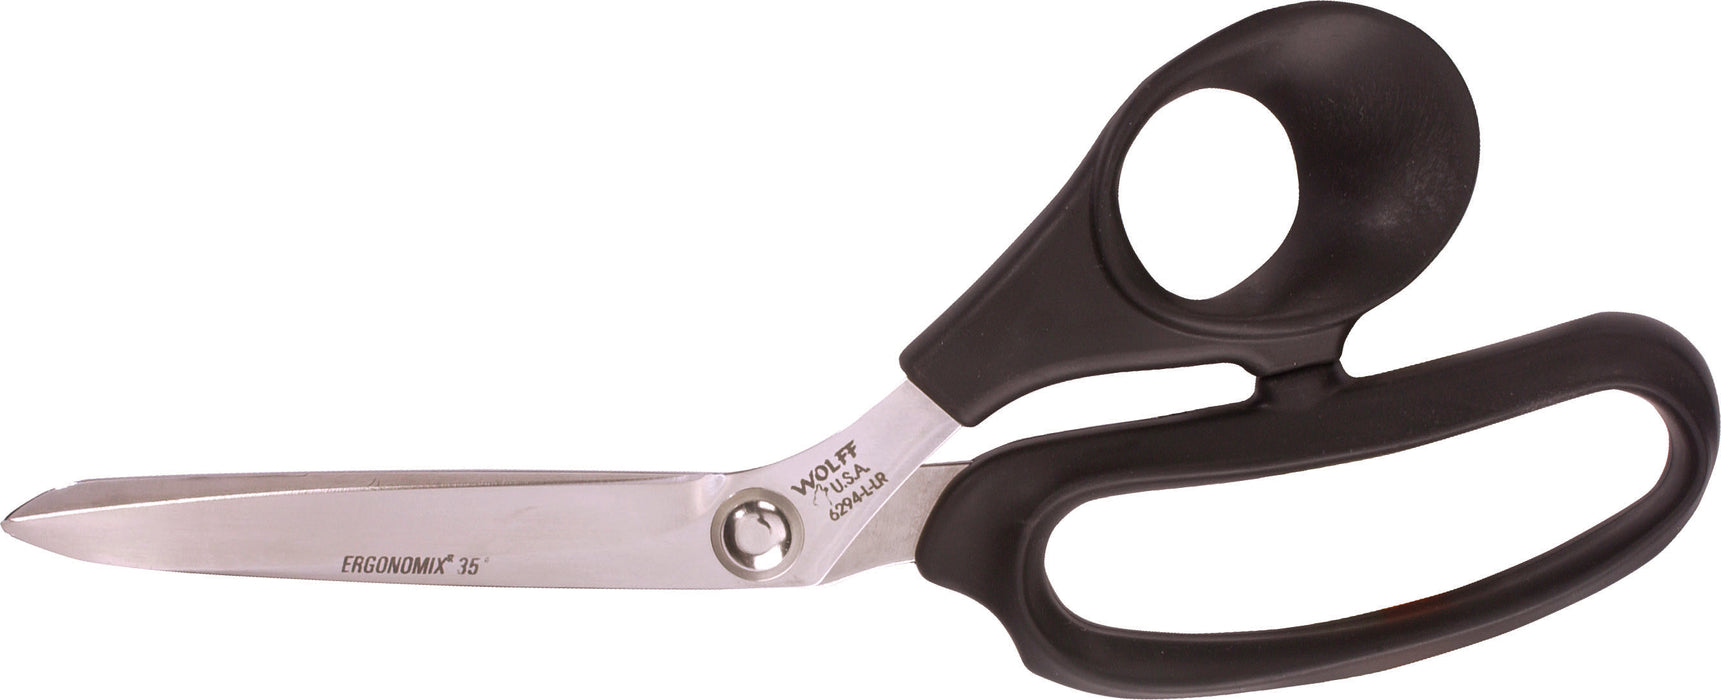 Wolff® 6294-L-LR 9 5/8" Ergonomix® Poultry Scissors - 6000 Series Stainless Steel Shears